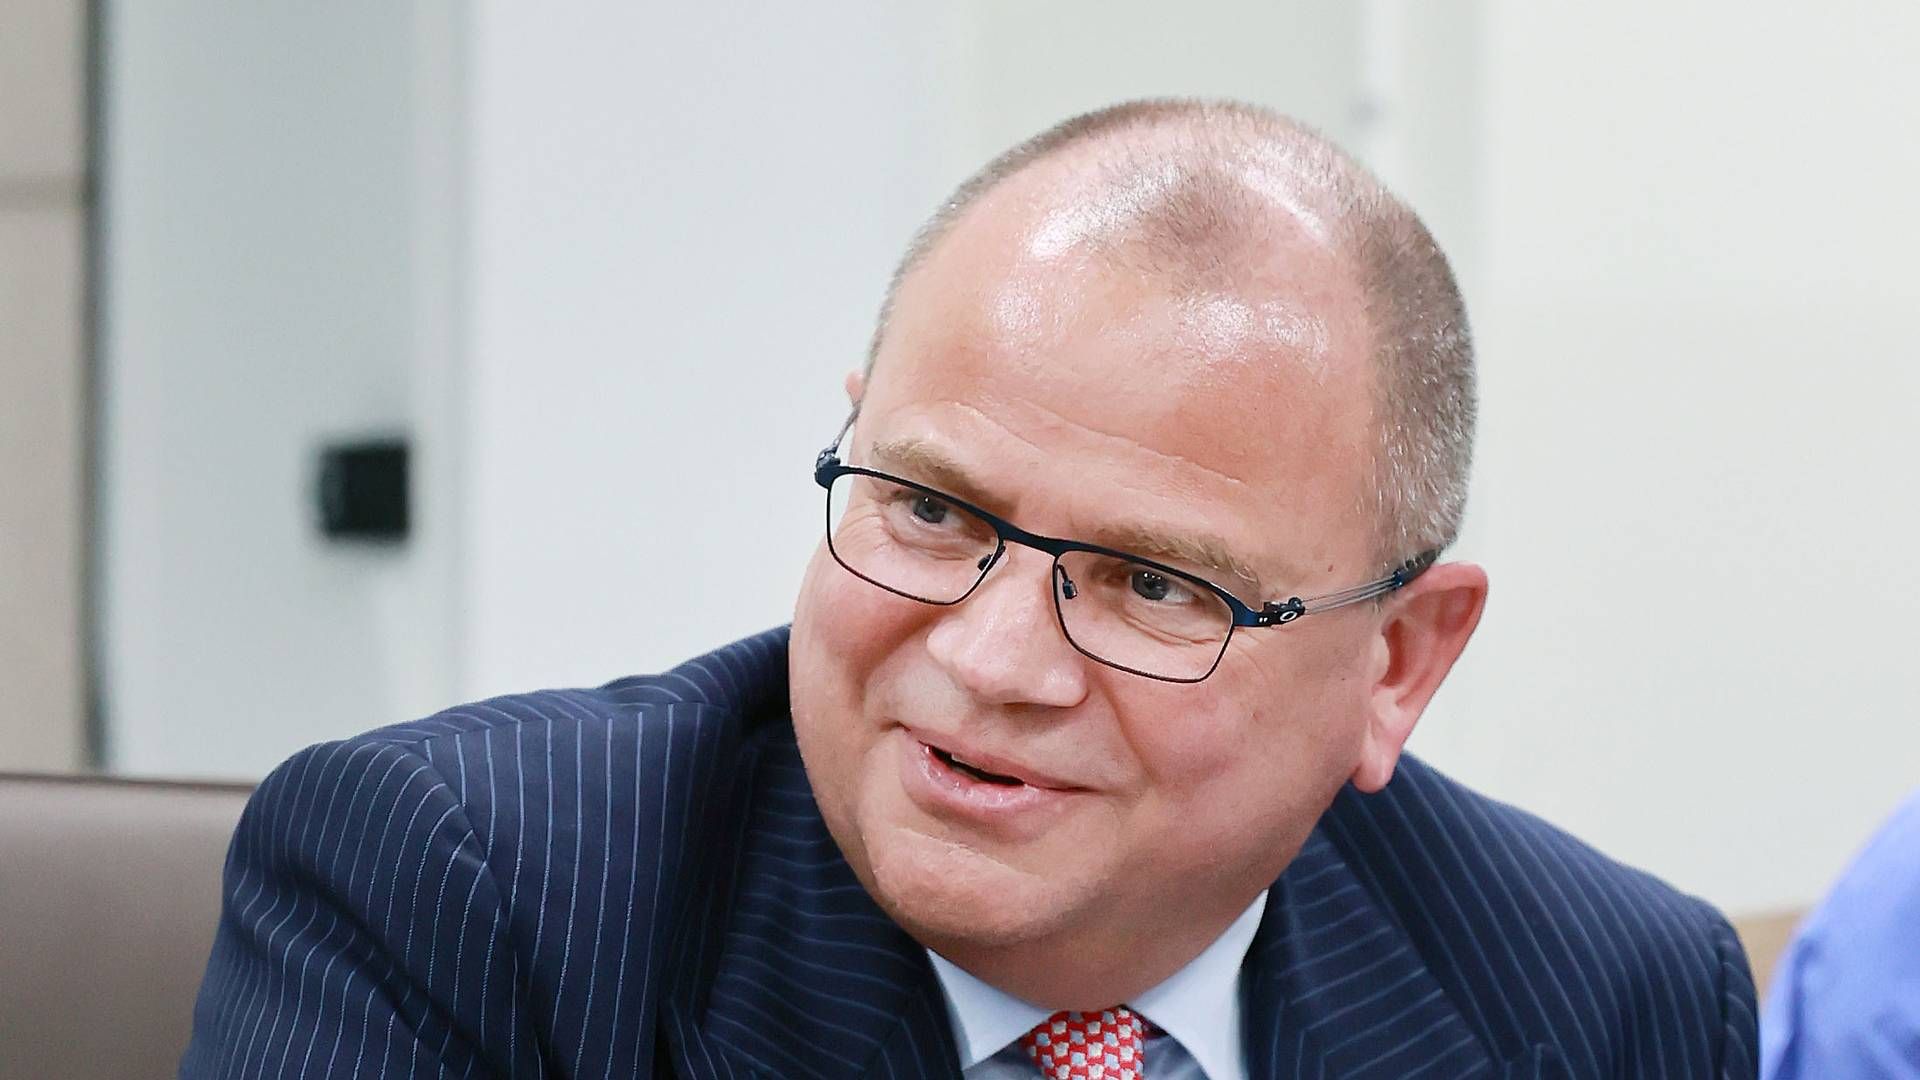 ”We are very pleased to be expanding our partnership with DTEK again and build the Tyligulska project to support the reconstruction of Ukraine’s energy sector and show that Ukraine is open for business,” says Vestas CEO Henrik Andersen. | Photo: motie.go.kr